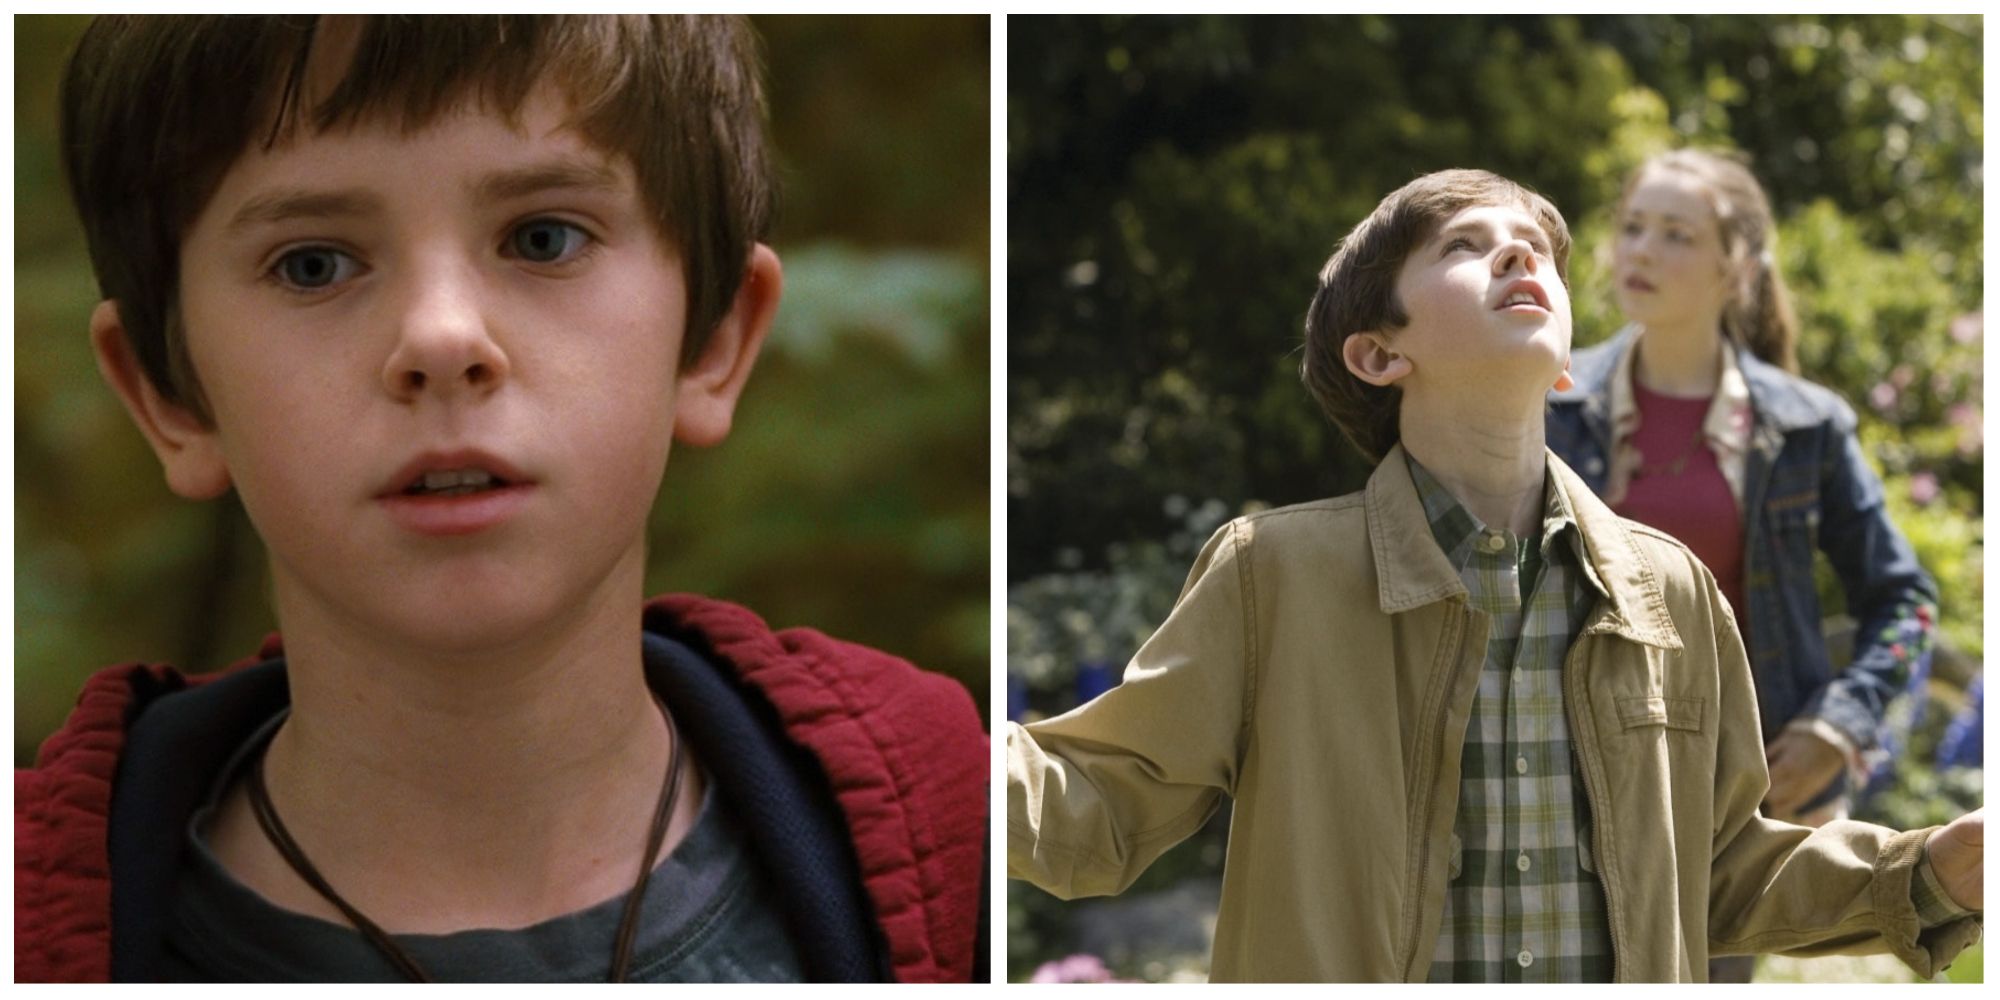 Left image: Jared exploring the woods. Right: his twin Simon looking up at the sky with his arms outstretched.